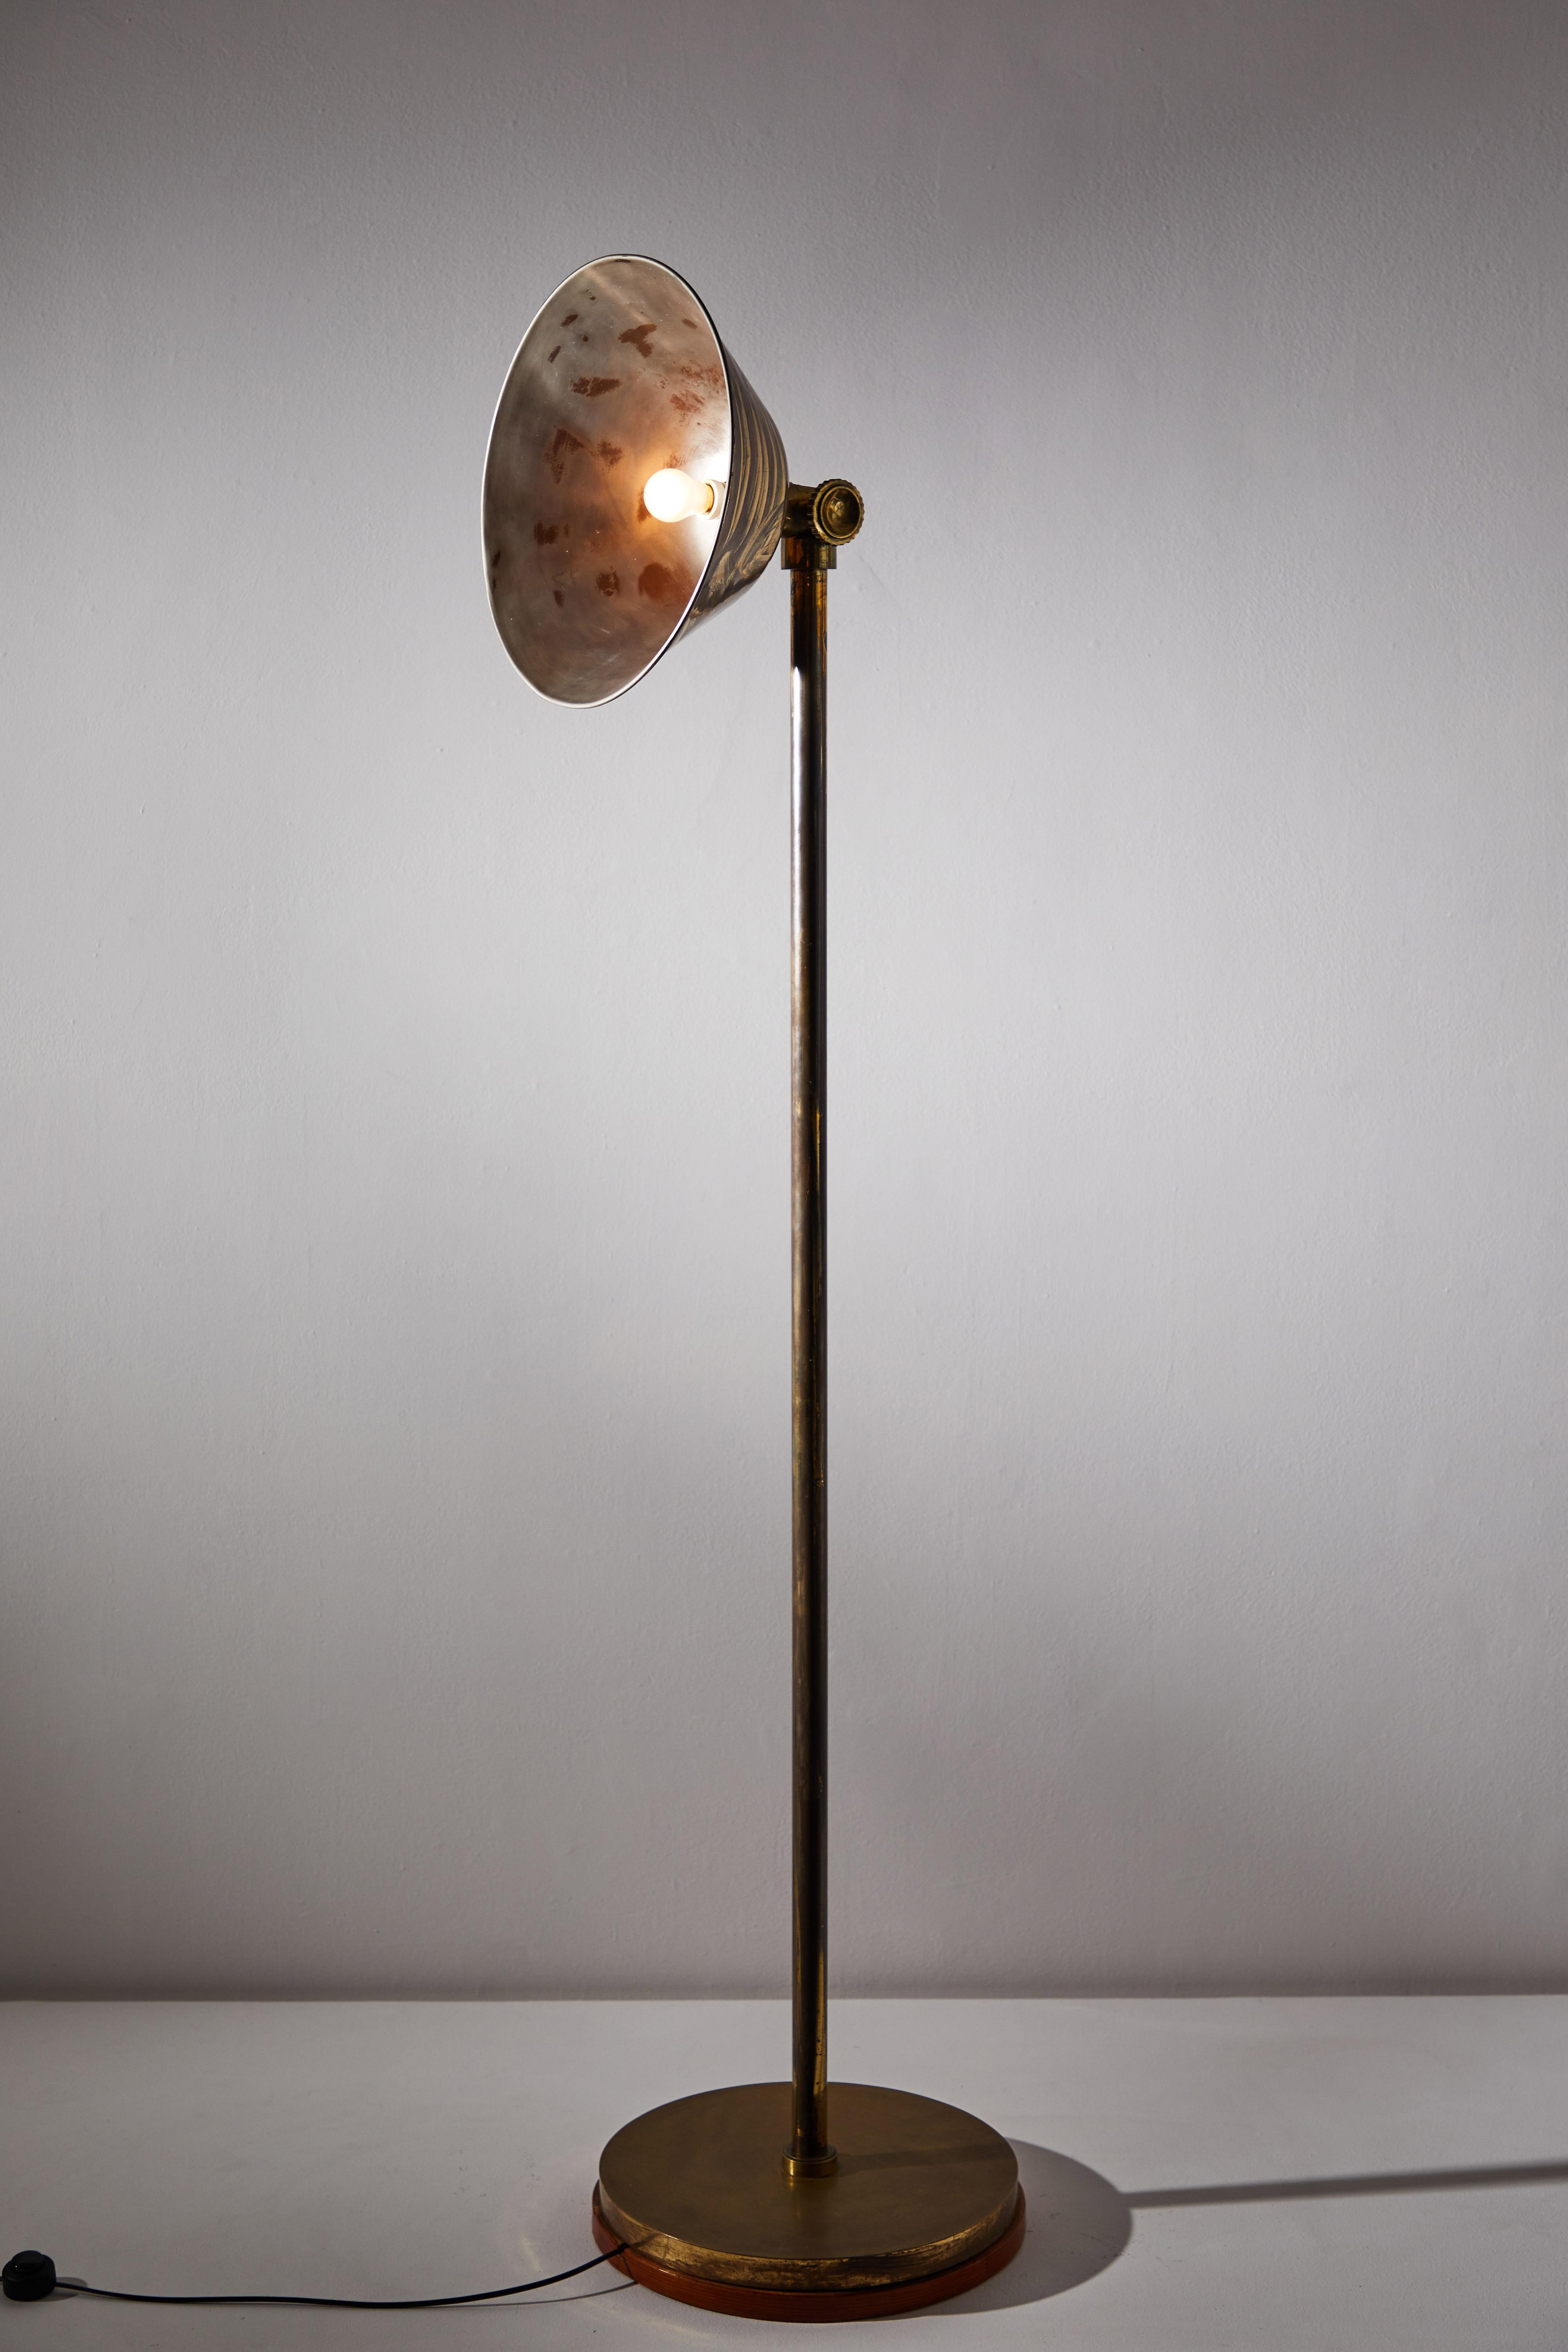 Rare and important GATCPAC floor lamp by Josep Torres Clavé. Designed and manufactured in Spain, in 1931. Brushed brass. Rewired for U.S. standards. At the top, there is a joint that can be adjusted by hand grips. Additionally, there is a